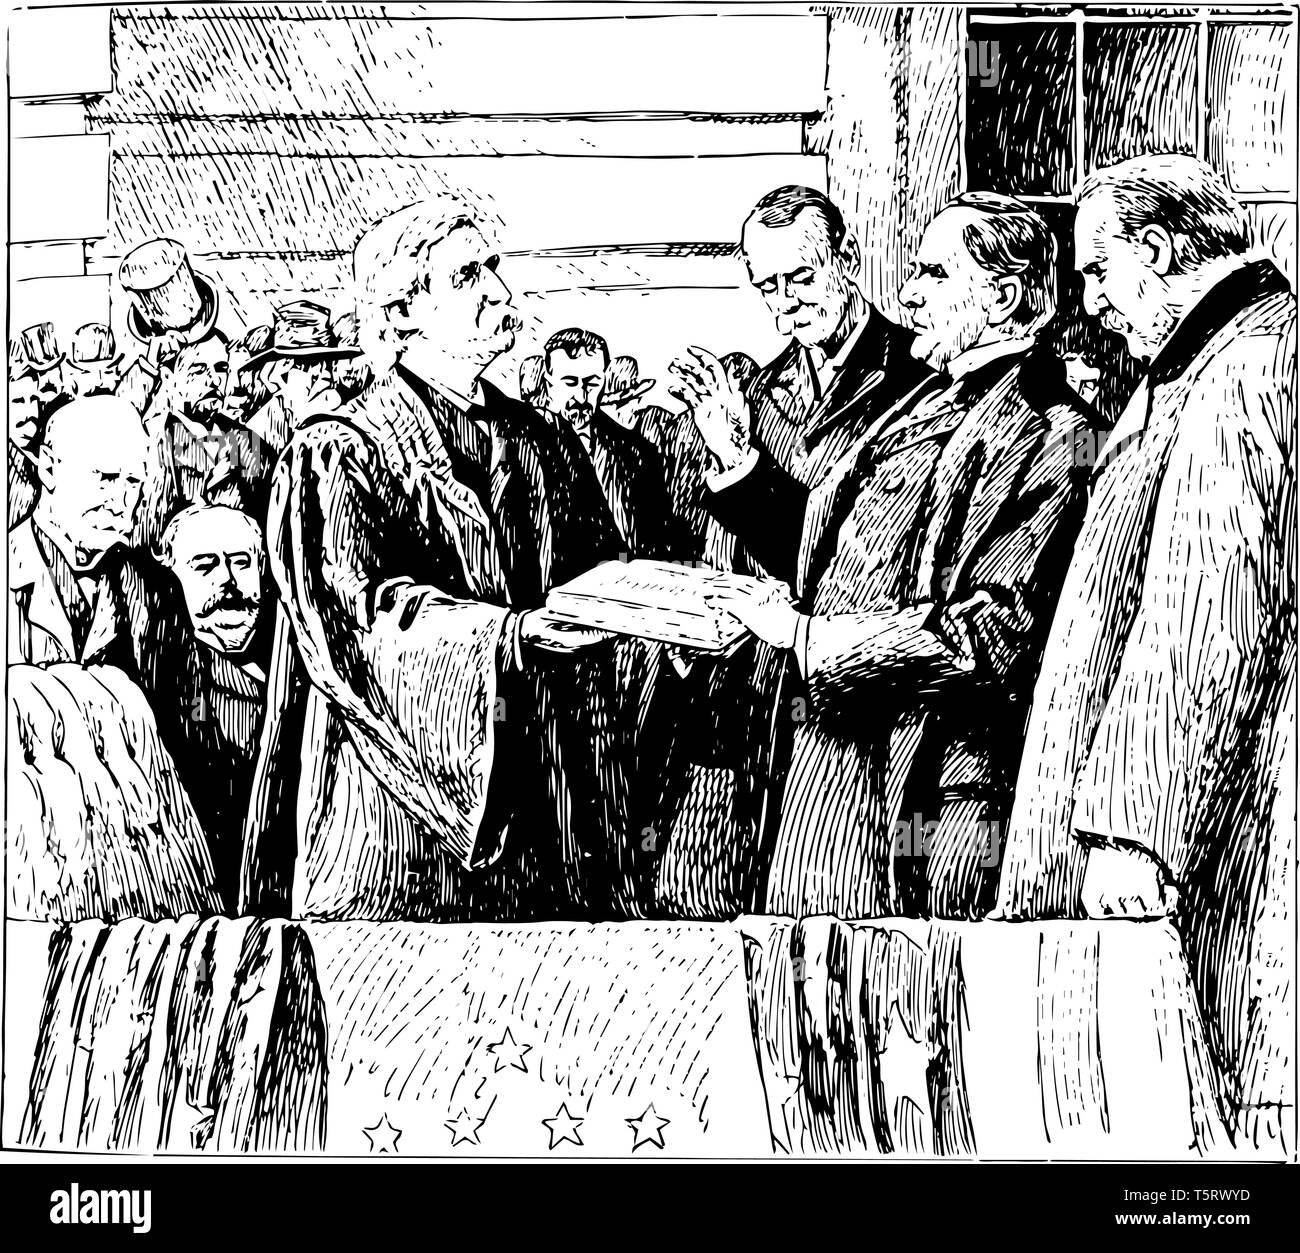 First inaguration of William McKinley in 1897 as 25th president vintage line drawing. Stock Vector